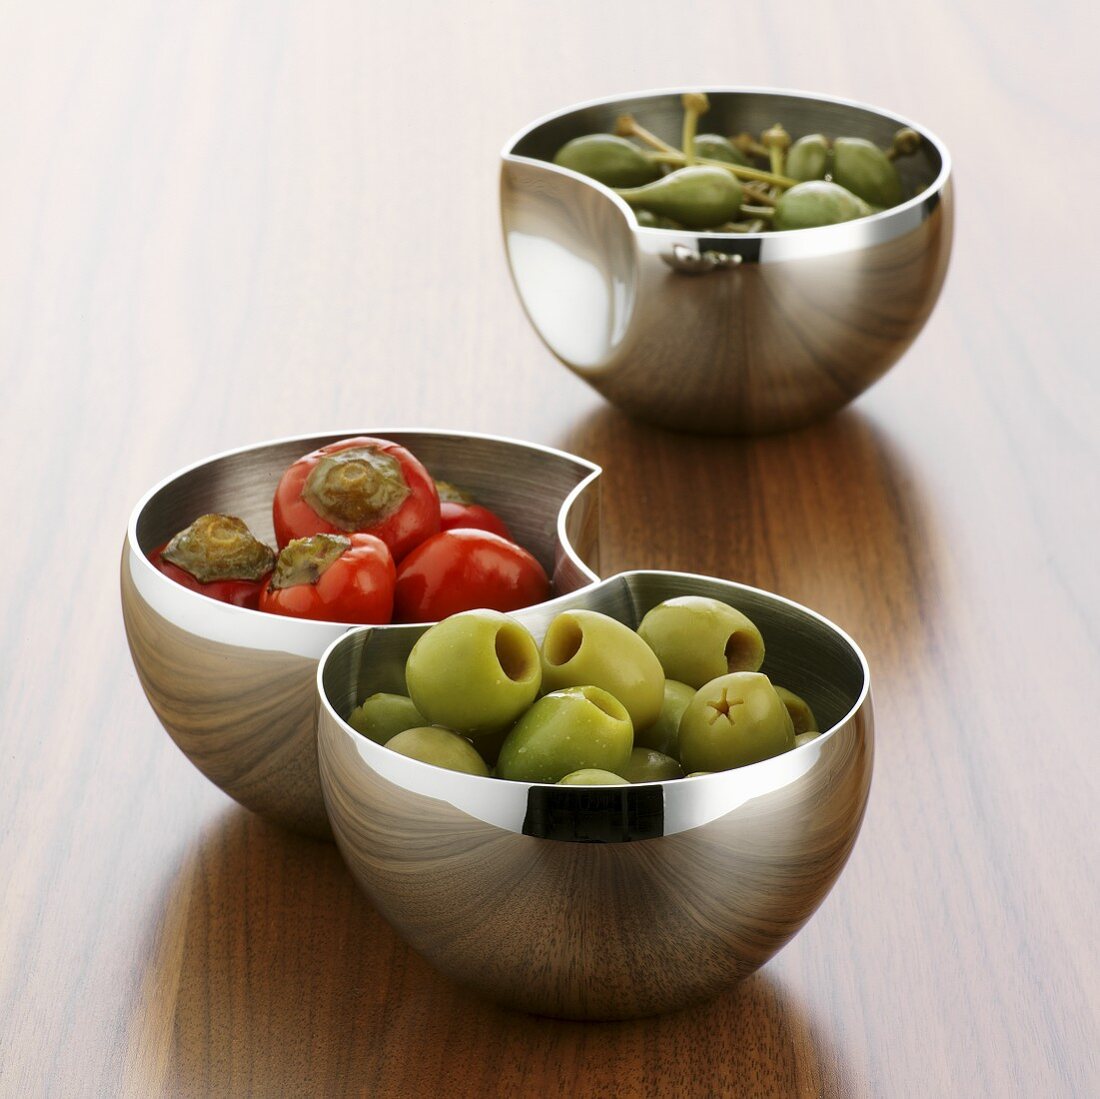 Chillies, giant capers and olives in small bowls